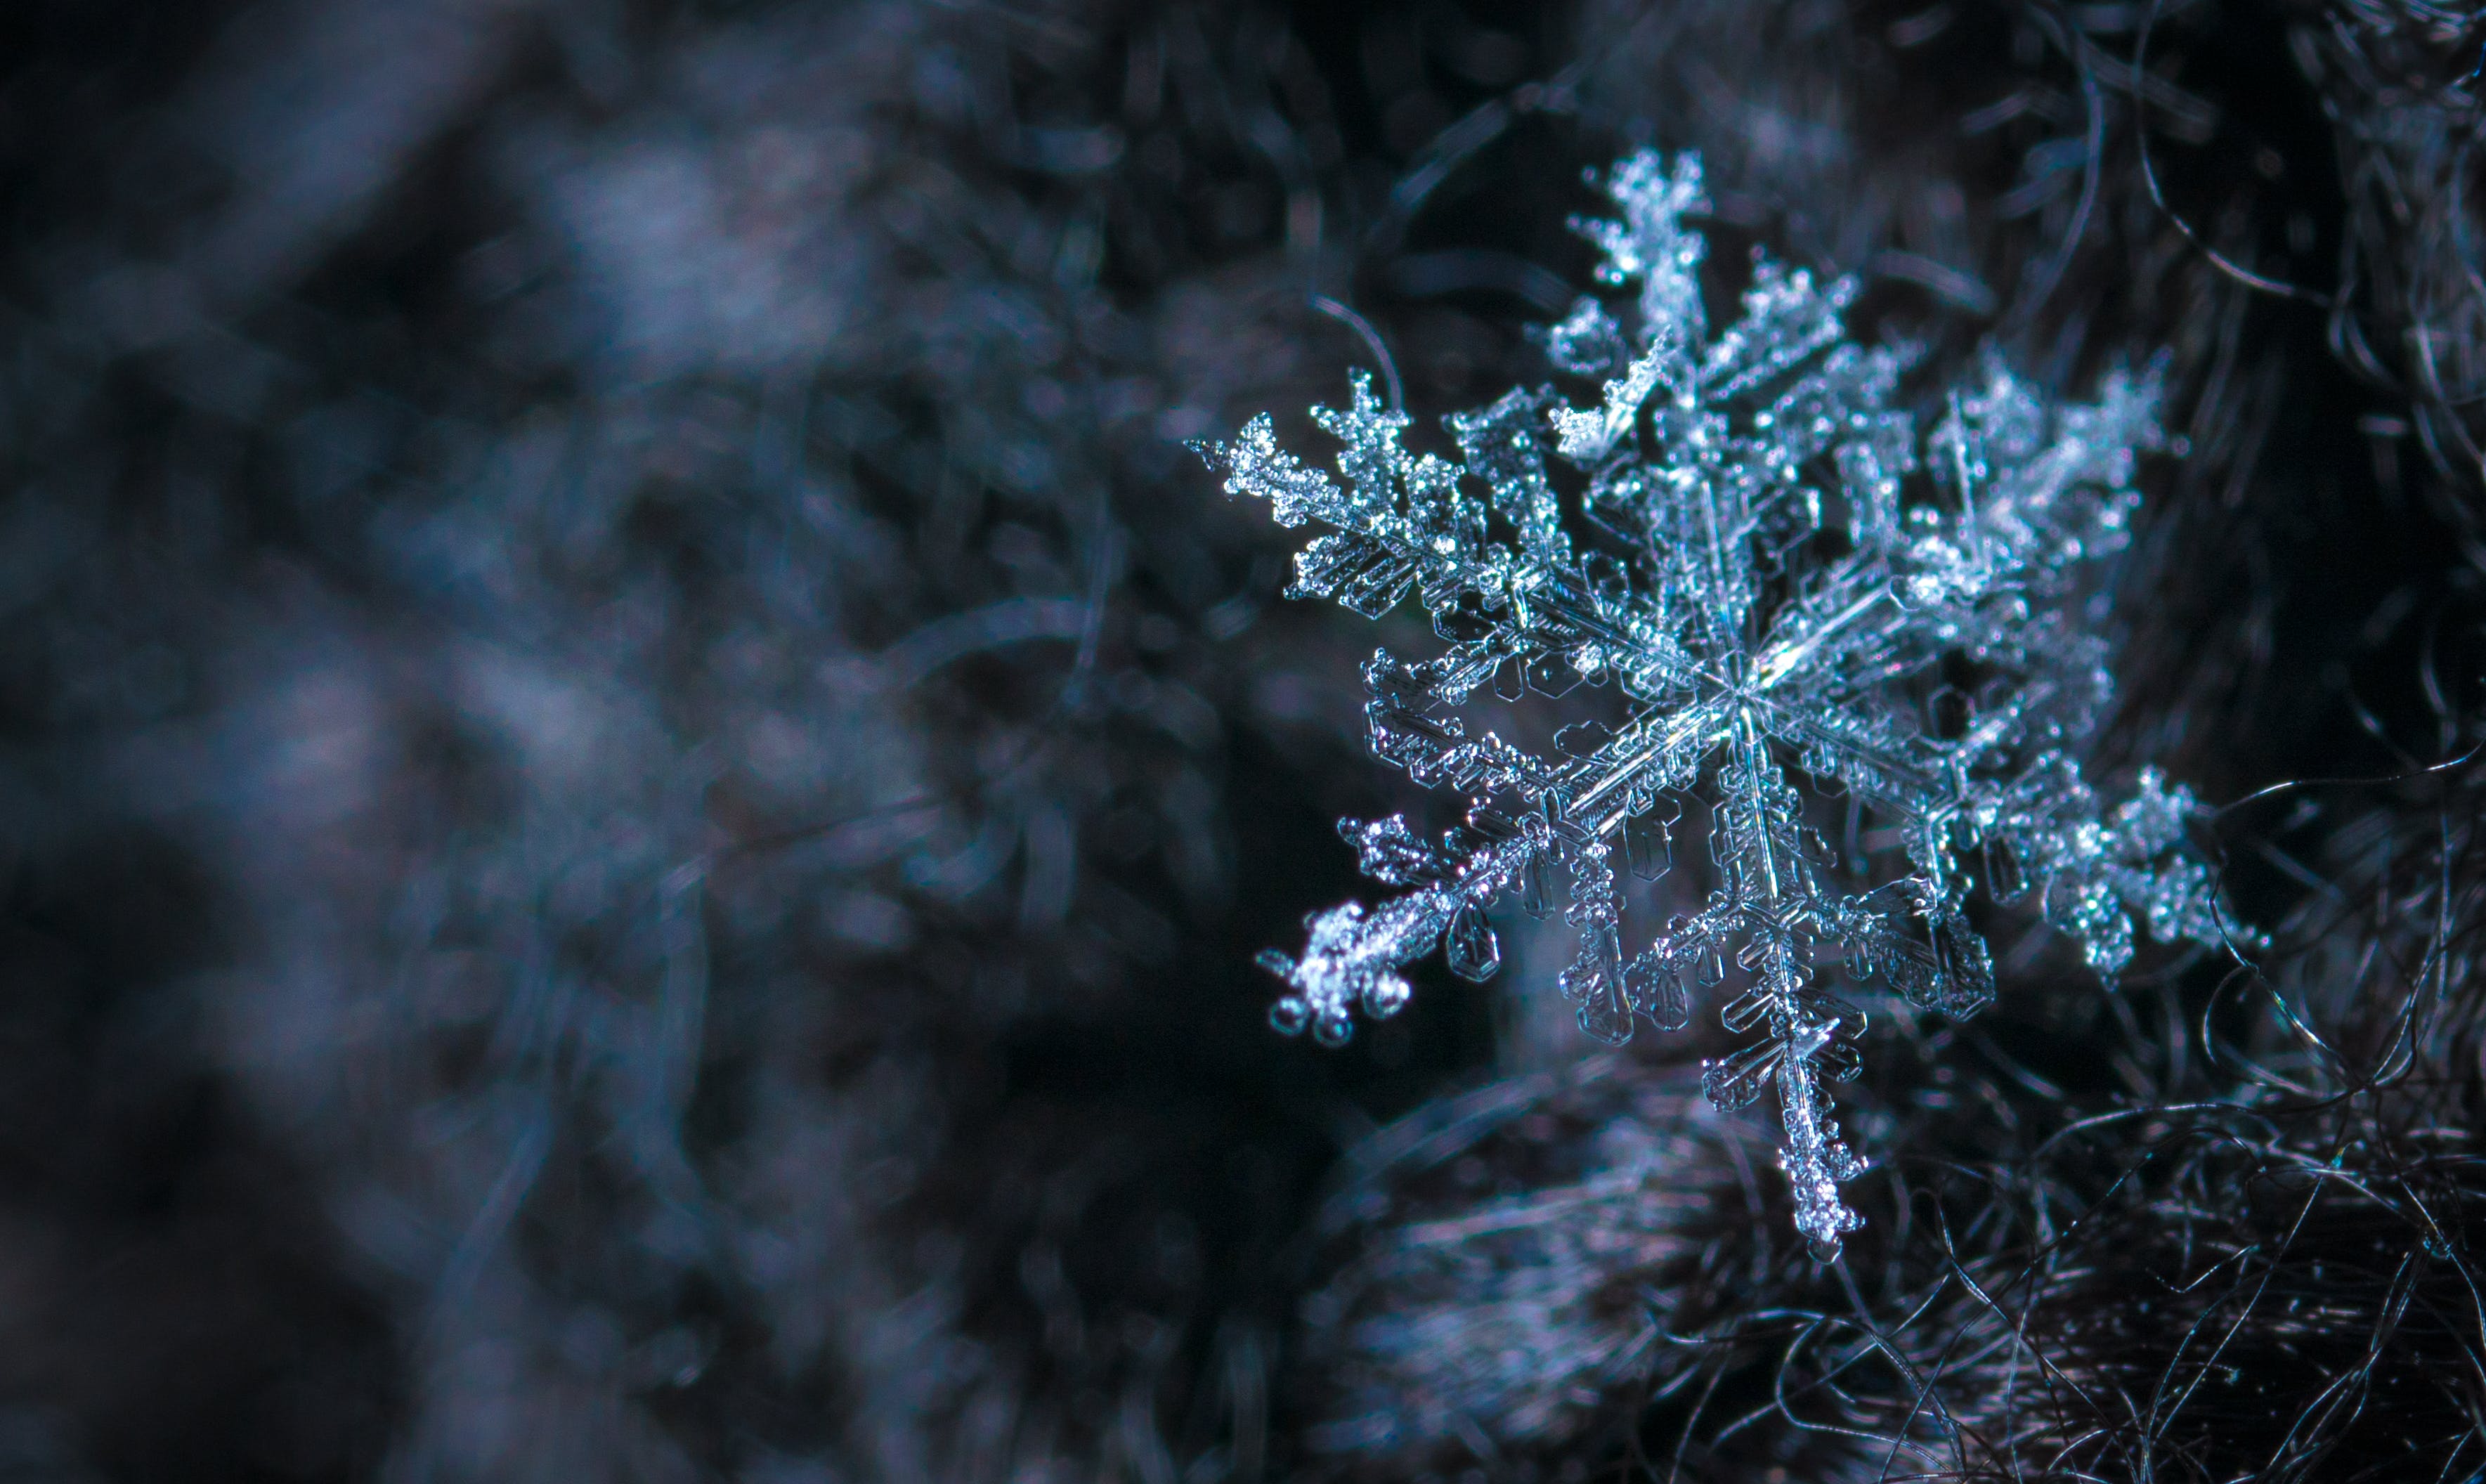 up-close picture of a snowflake